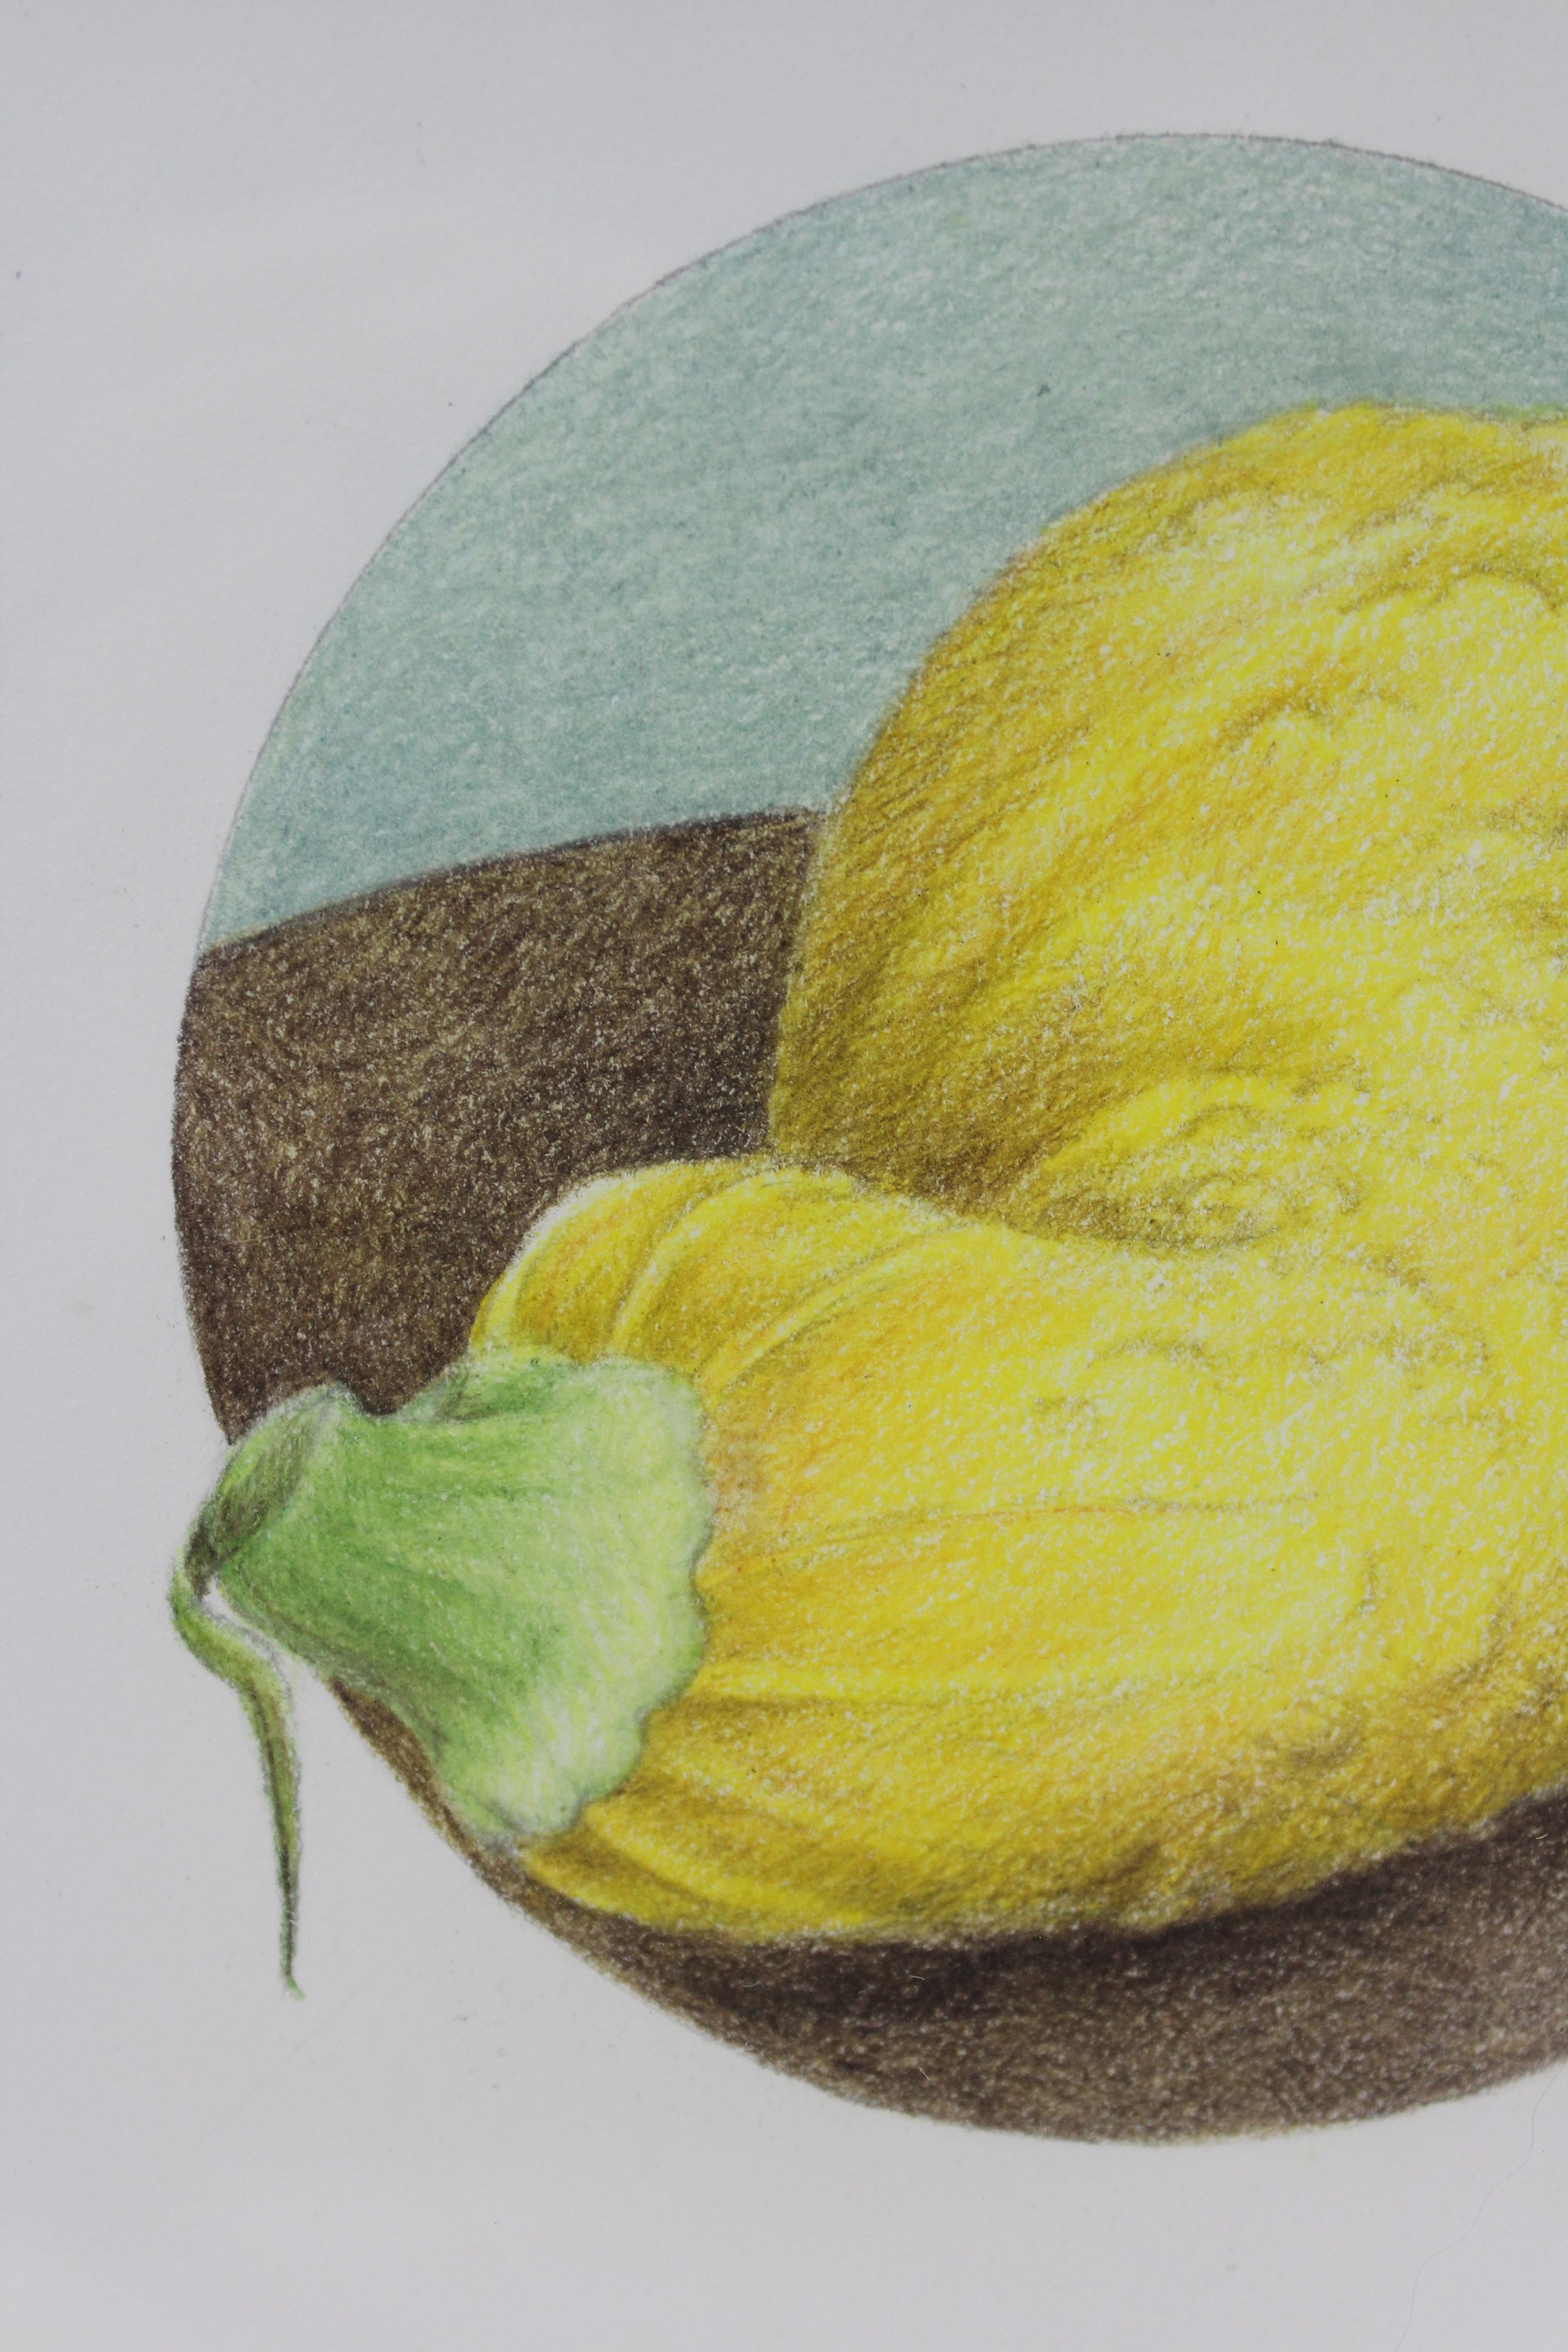 Squash by Mary Lee Eggart